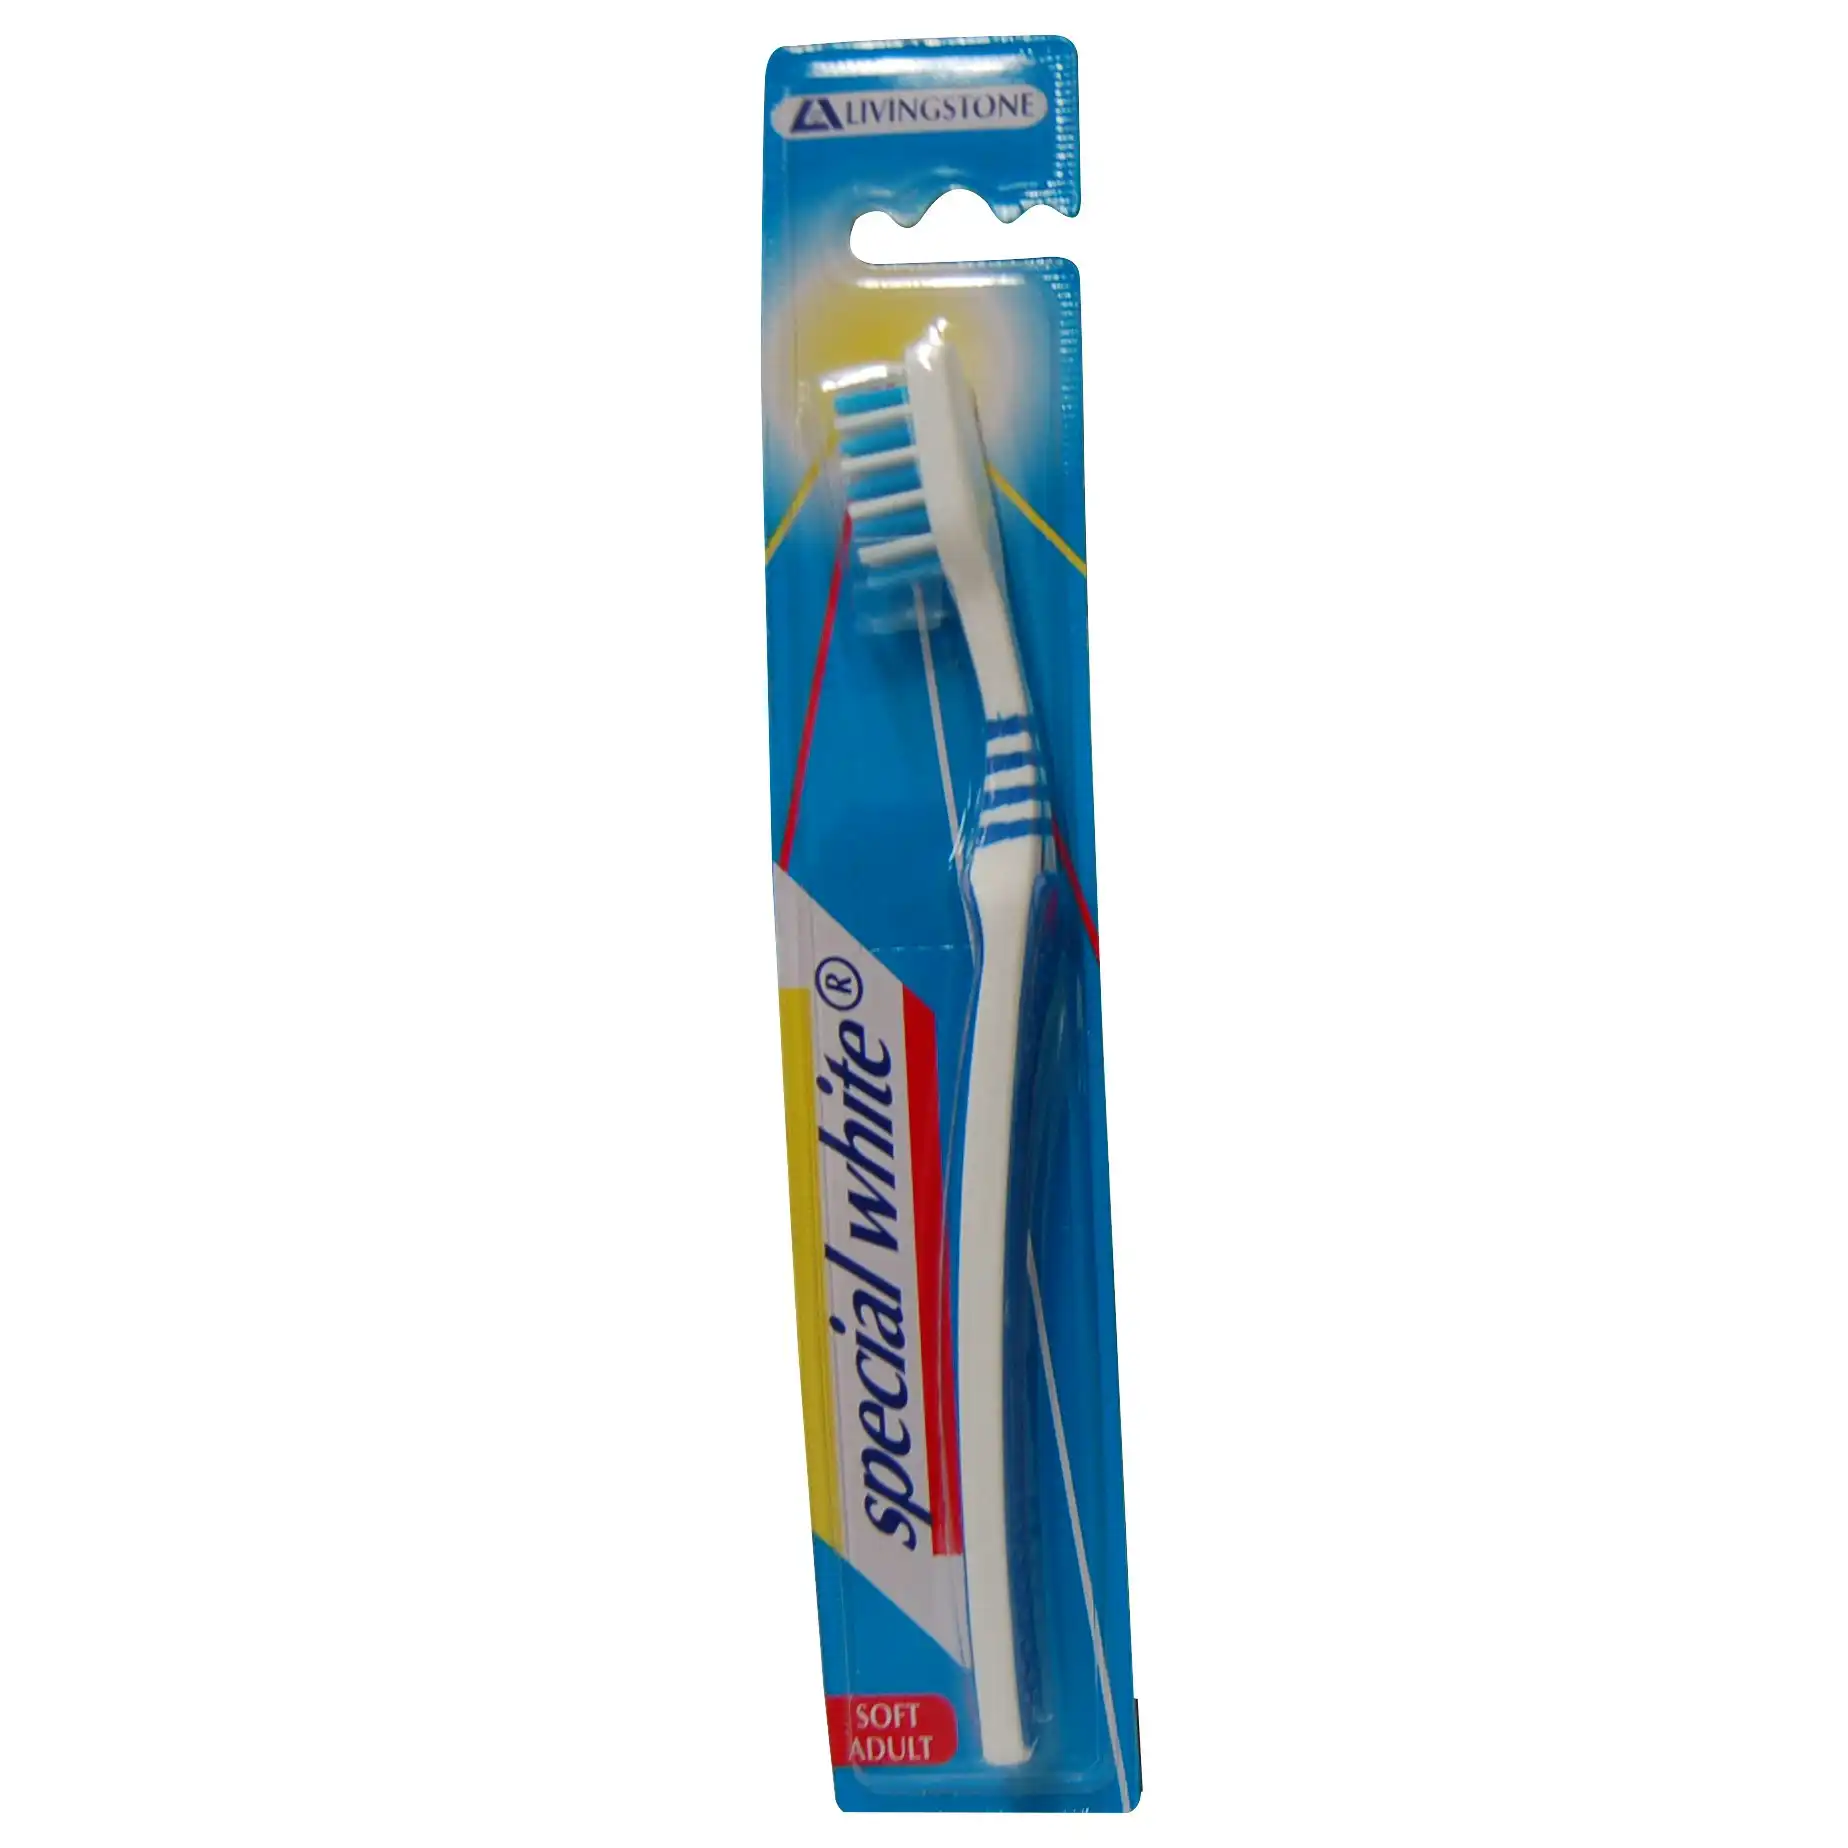 Livingstone Special White Toothbrush Adult Soft Bristles Blue 12 Pack